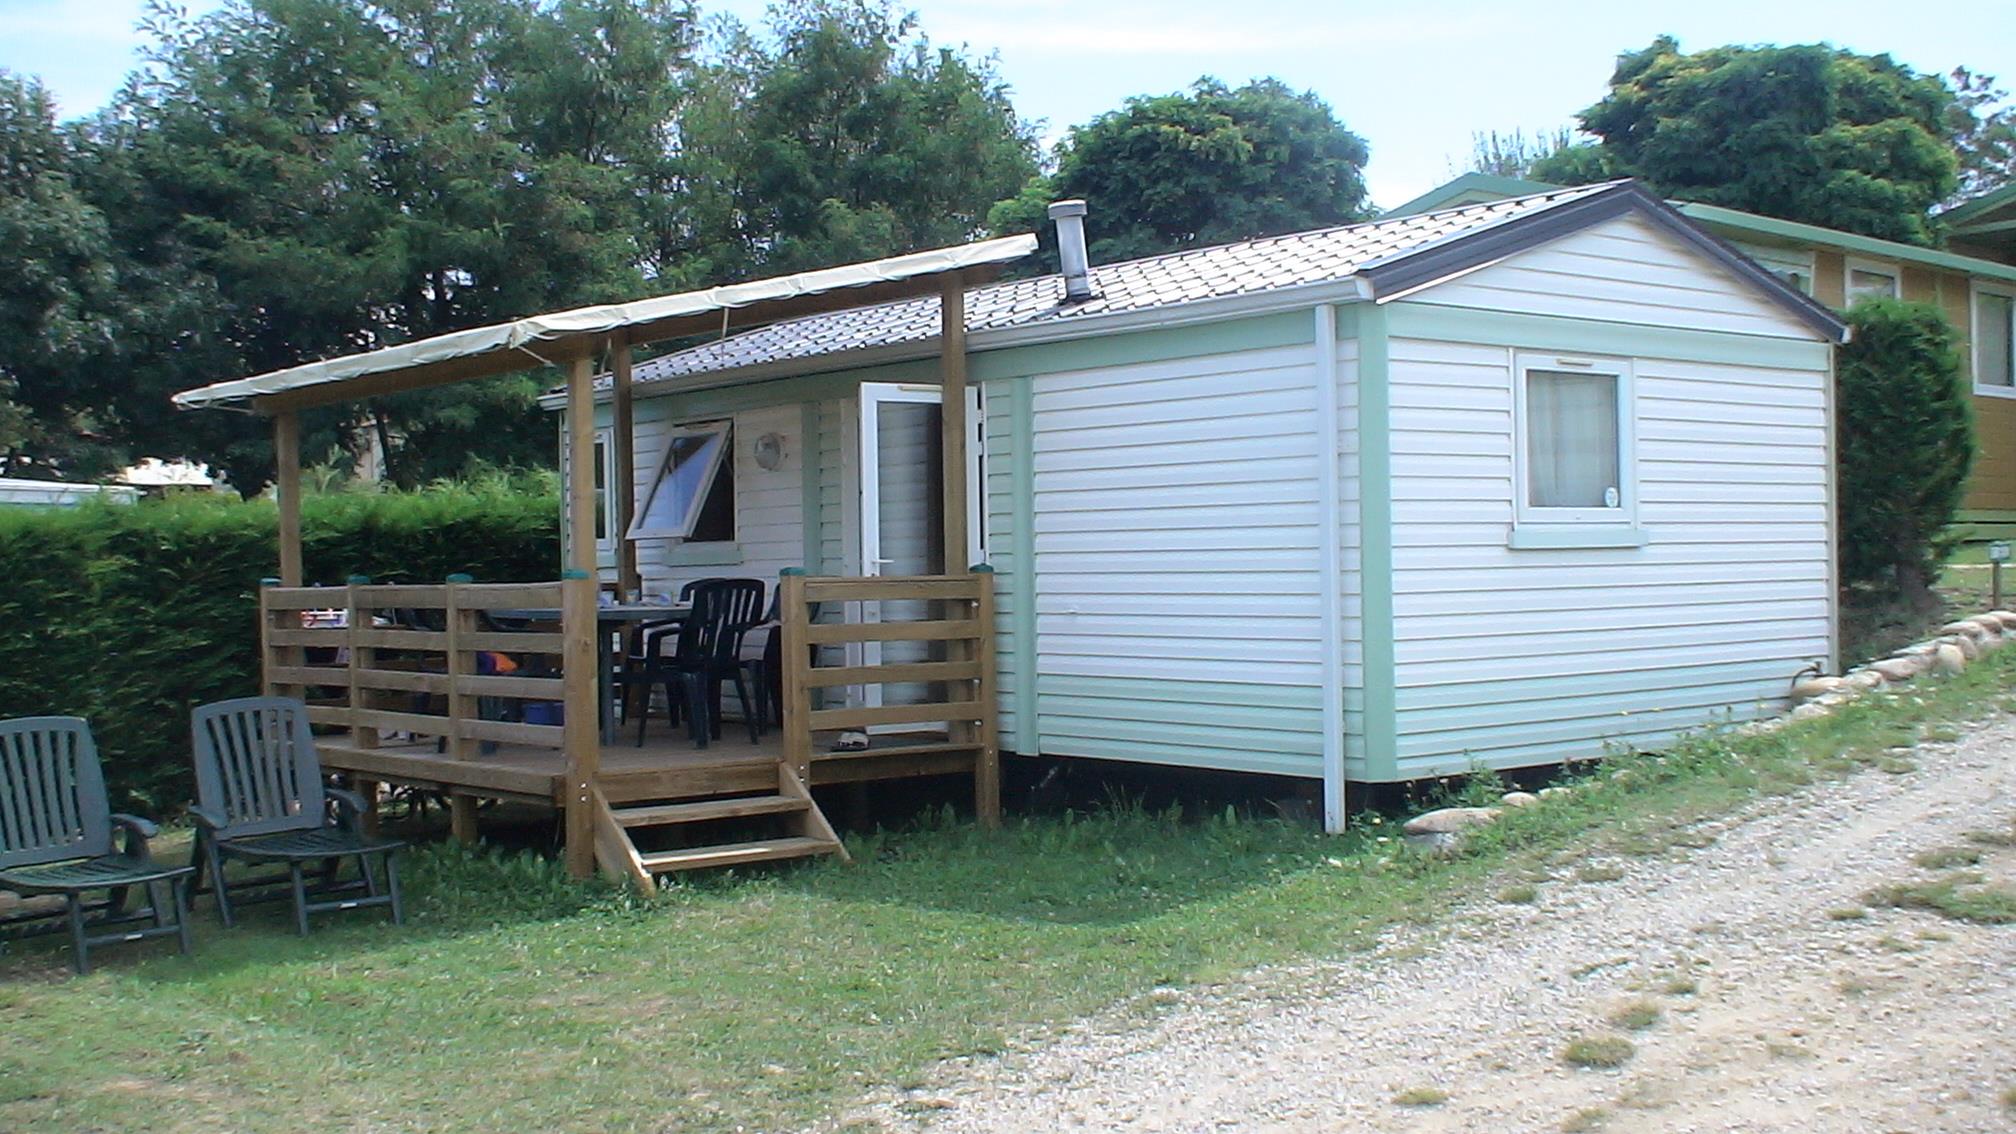 Location - Mobil Home Standard 27M²  (2 Chambres) + Terrasse Couverte - Flower Camping La Chataigneraie